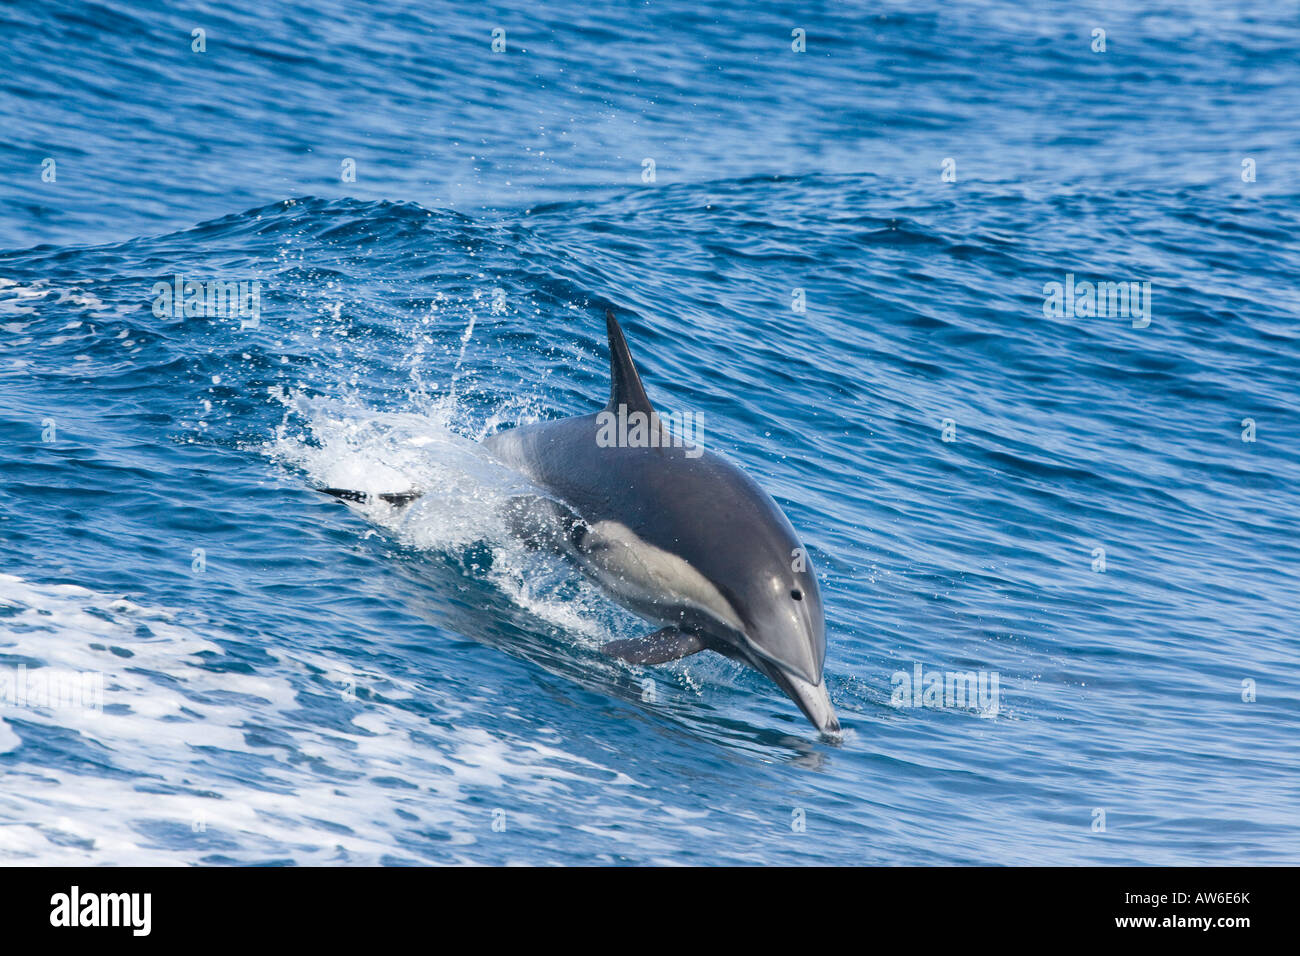 This common dolphin, Delphinus delphis, was one in a school of over 1000 in the Pacific off Mexico. Stock Photo